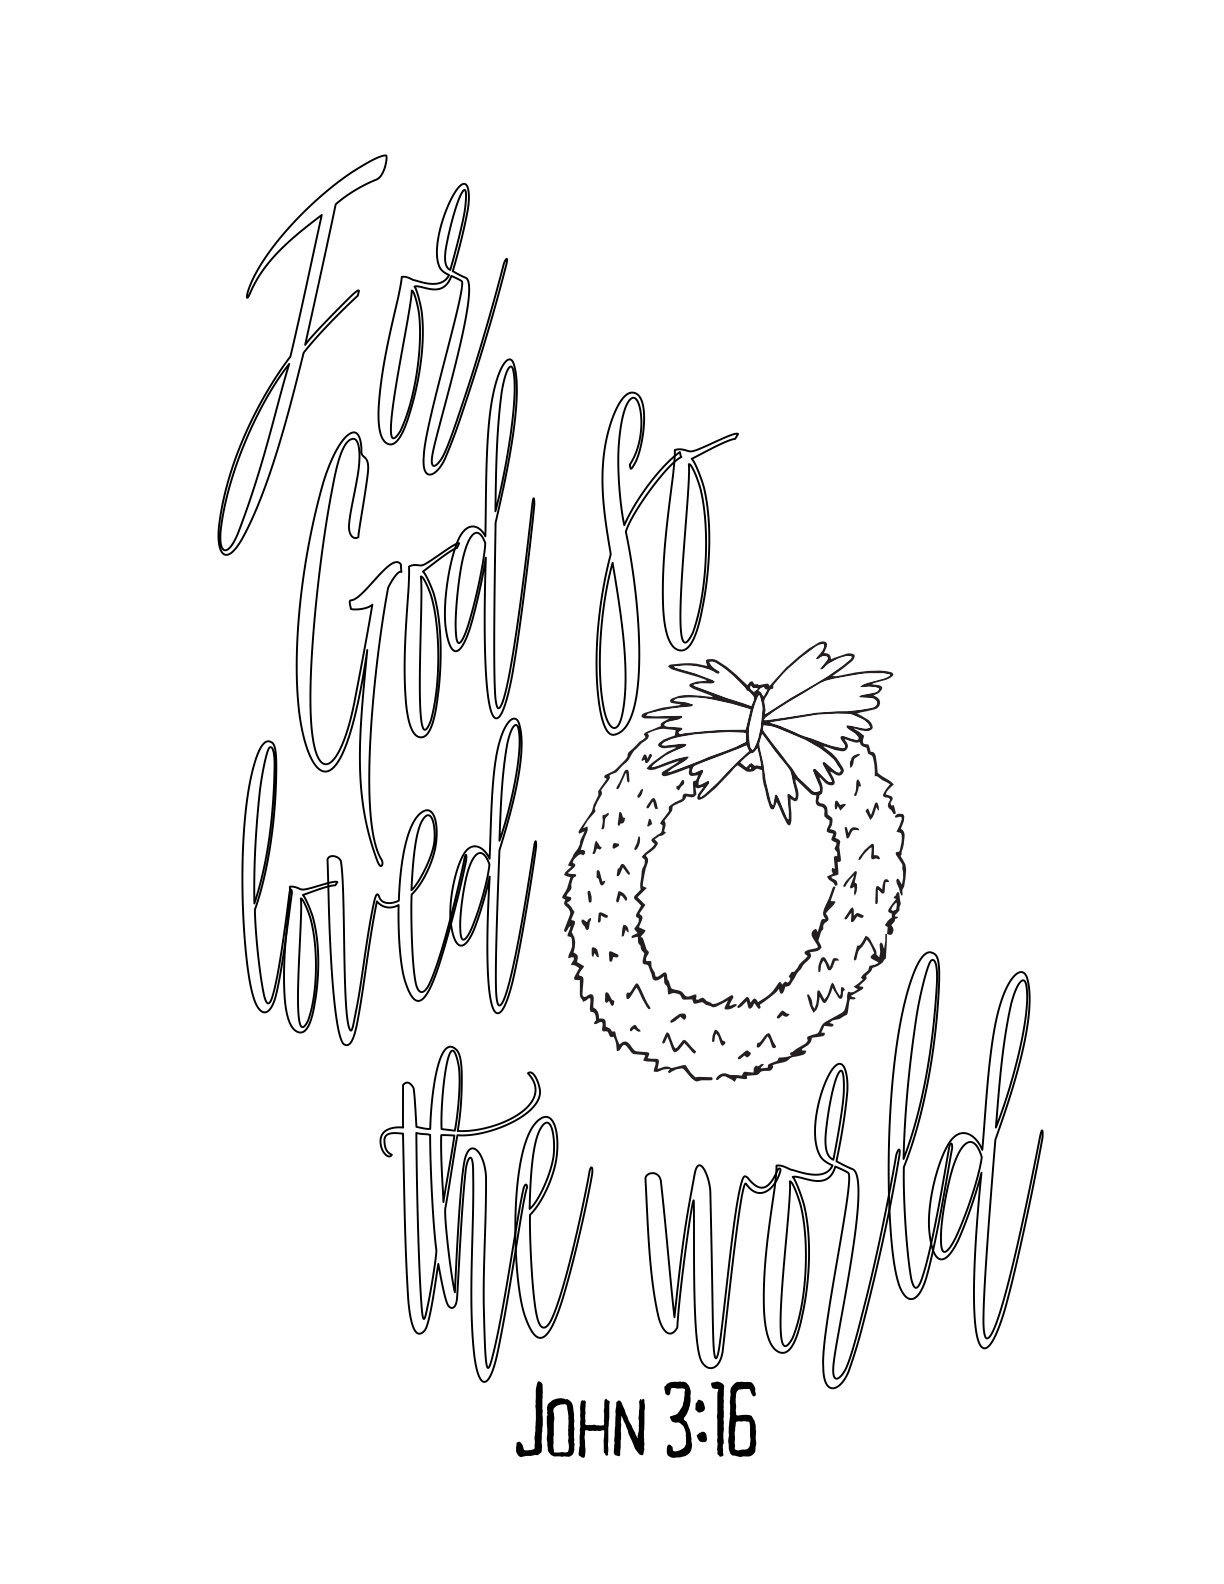 colorable text - For God So Loved The World - John 3:16CLICK HERE TO DOWNLOAD THIS FREE PRINTABLE CHRISTMAS COLORING PAGE